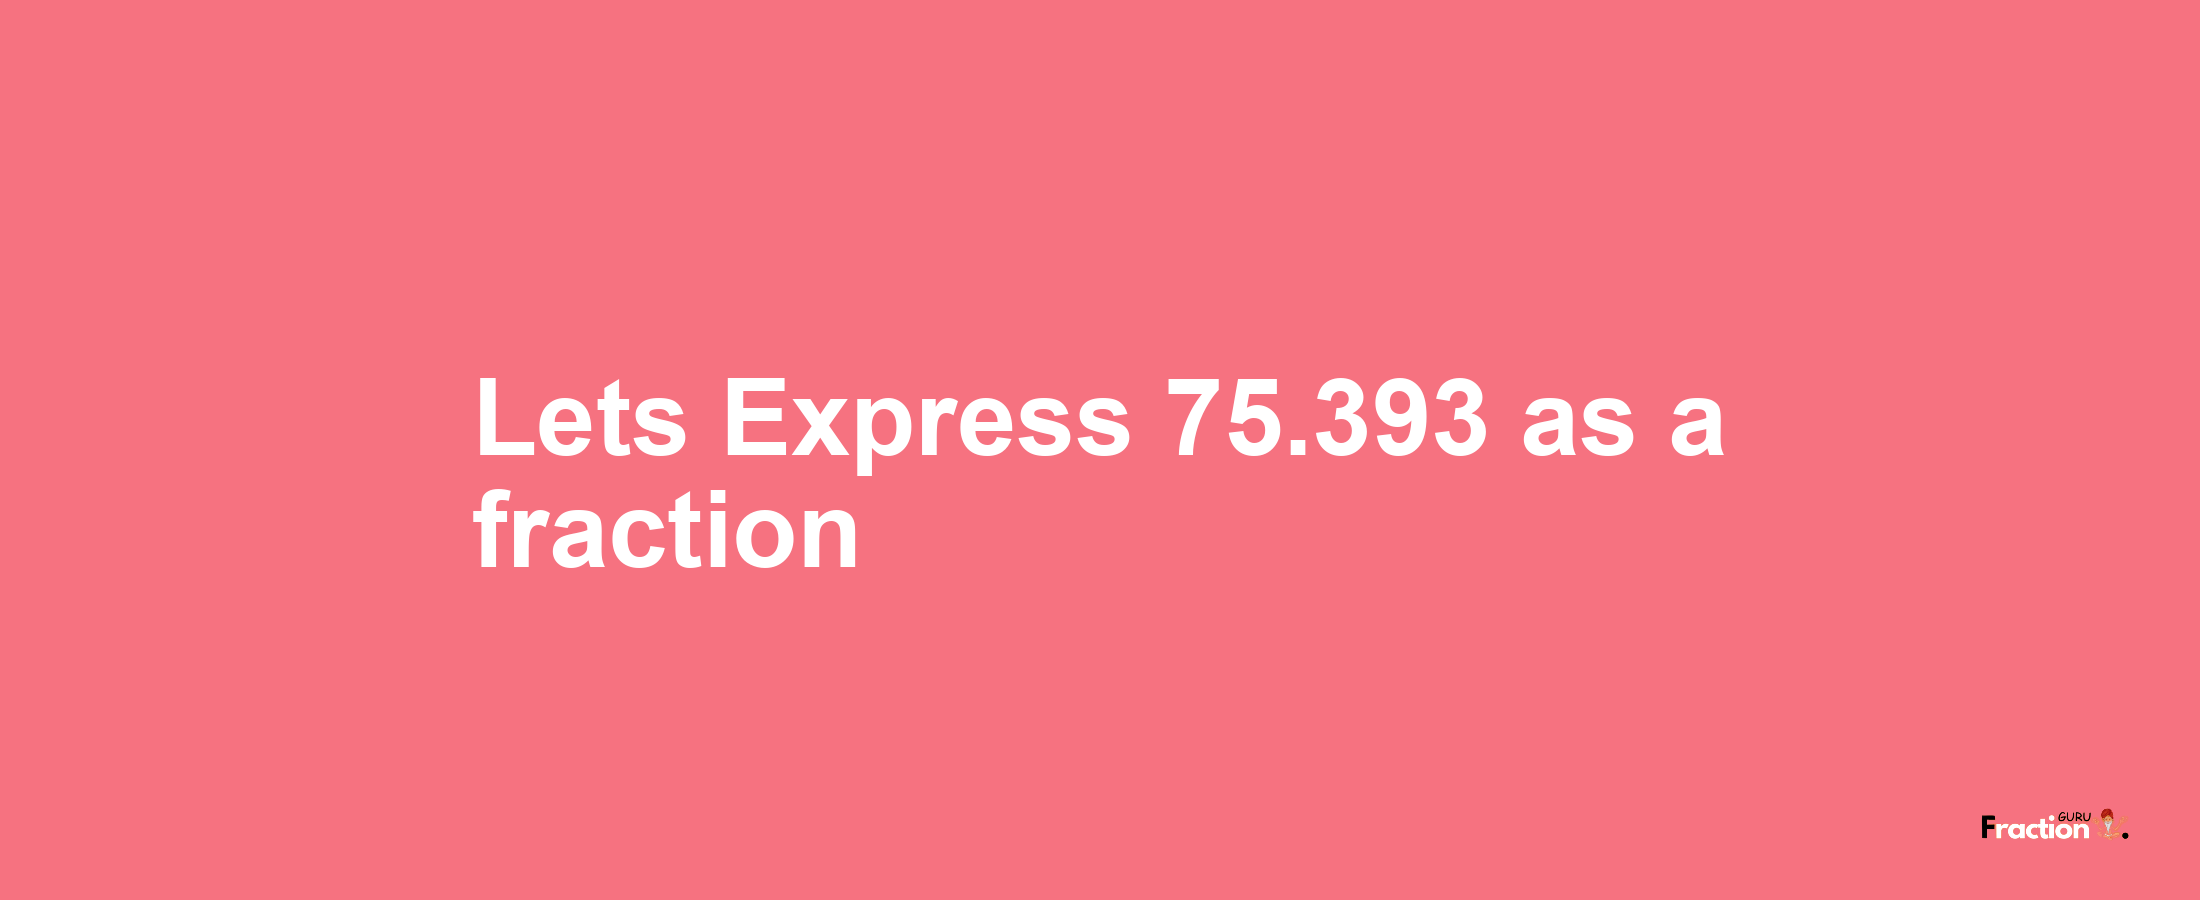 Lets Express 75.393 as afraction